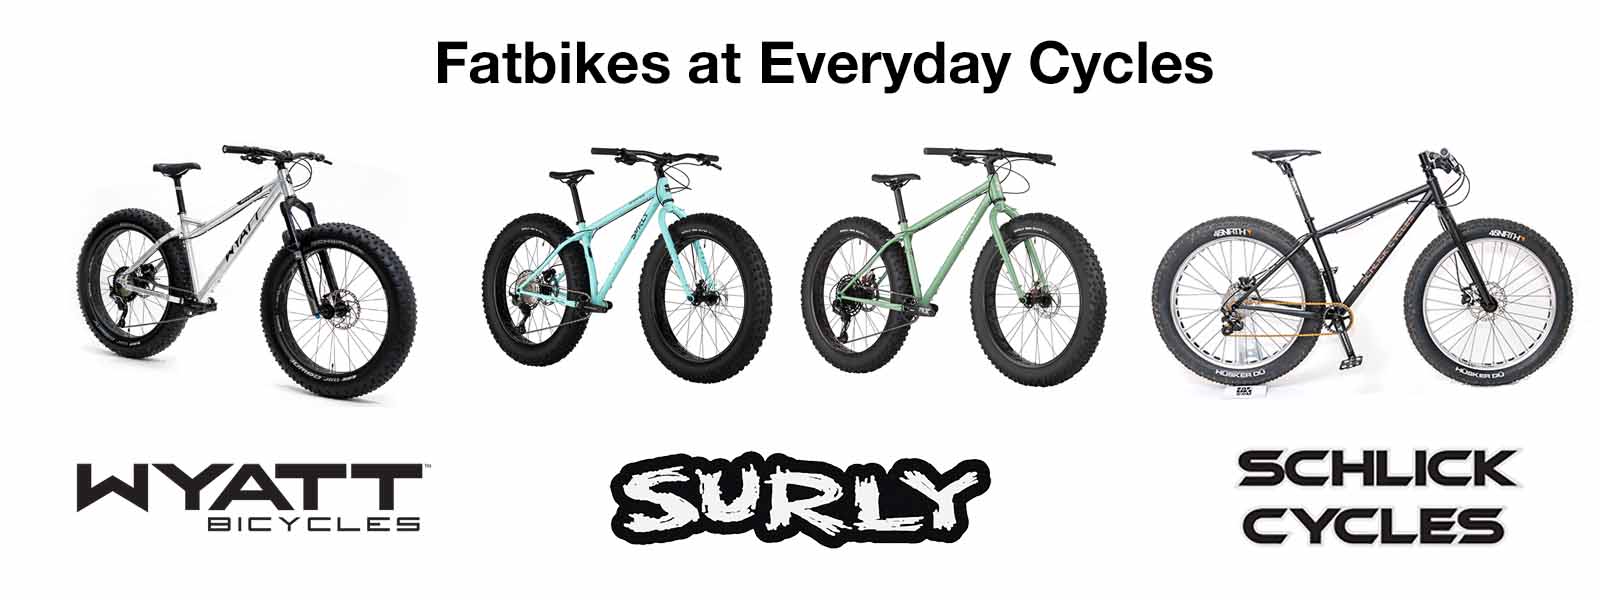 Fatbikes From Surly, Wyatt and Schlick Cycles Available Now at Everyday Cycles in Milwaukee